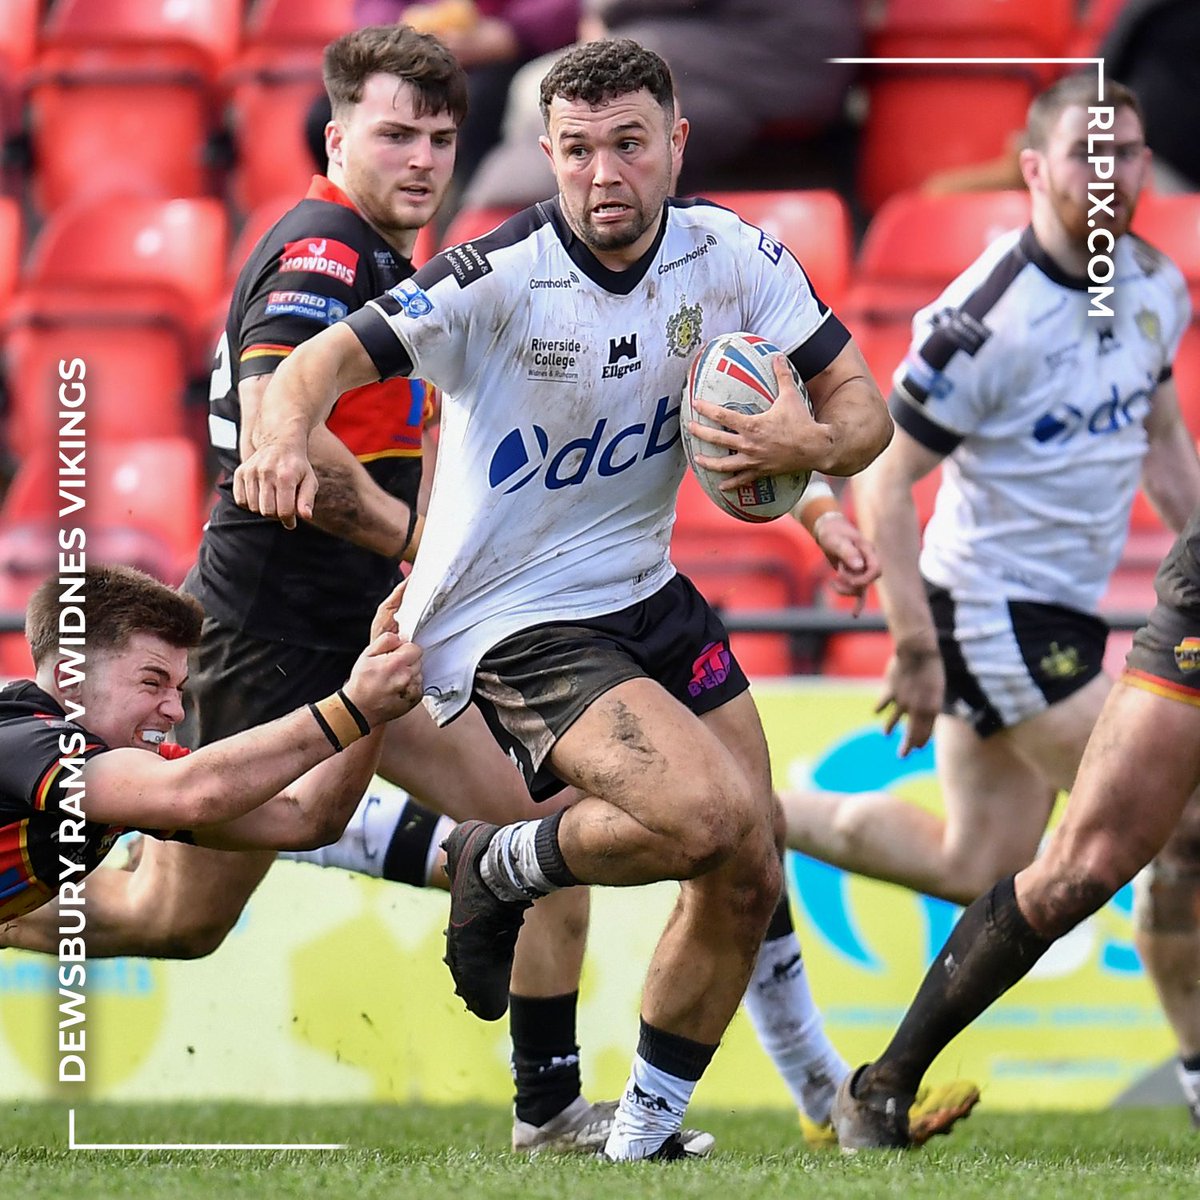 Images from @DewsburyRams v @widnesrl in the Betfred Championship Rd3 game now online - rlpix.com #rugbyleague #rfl #widnes #widnesvikings #sportsphotography